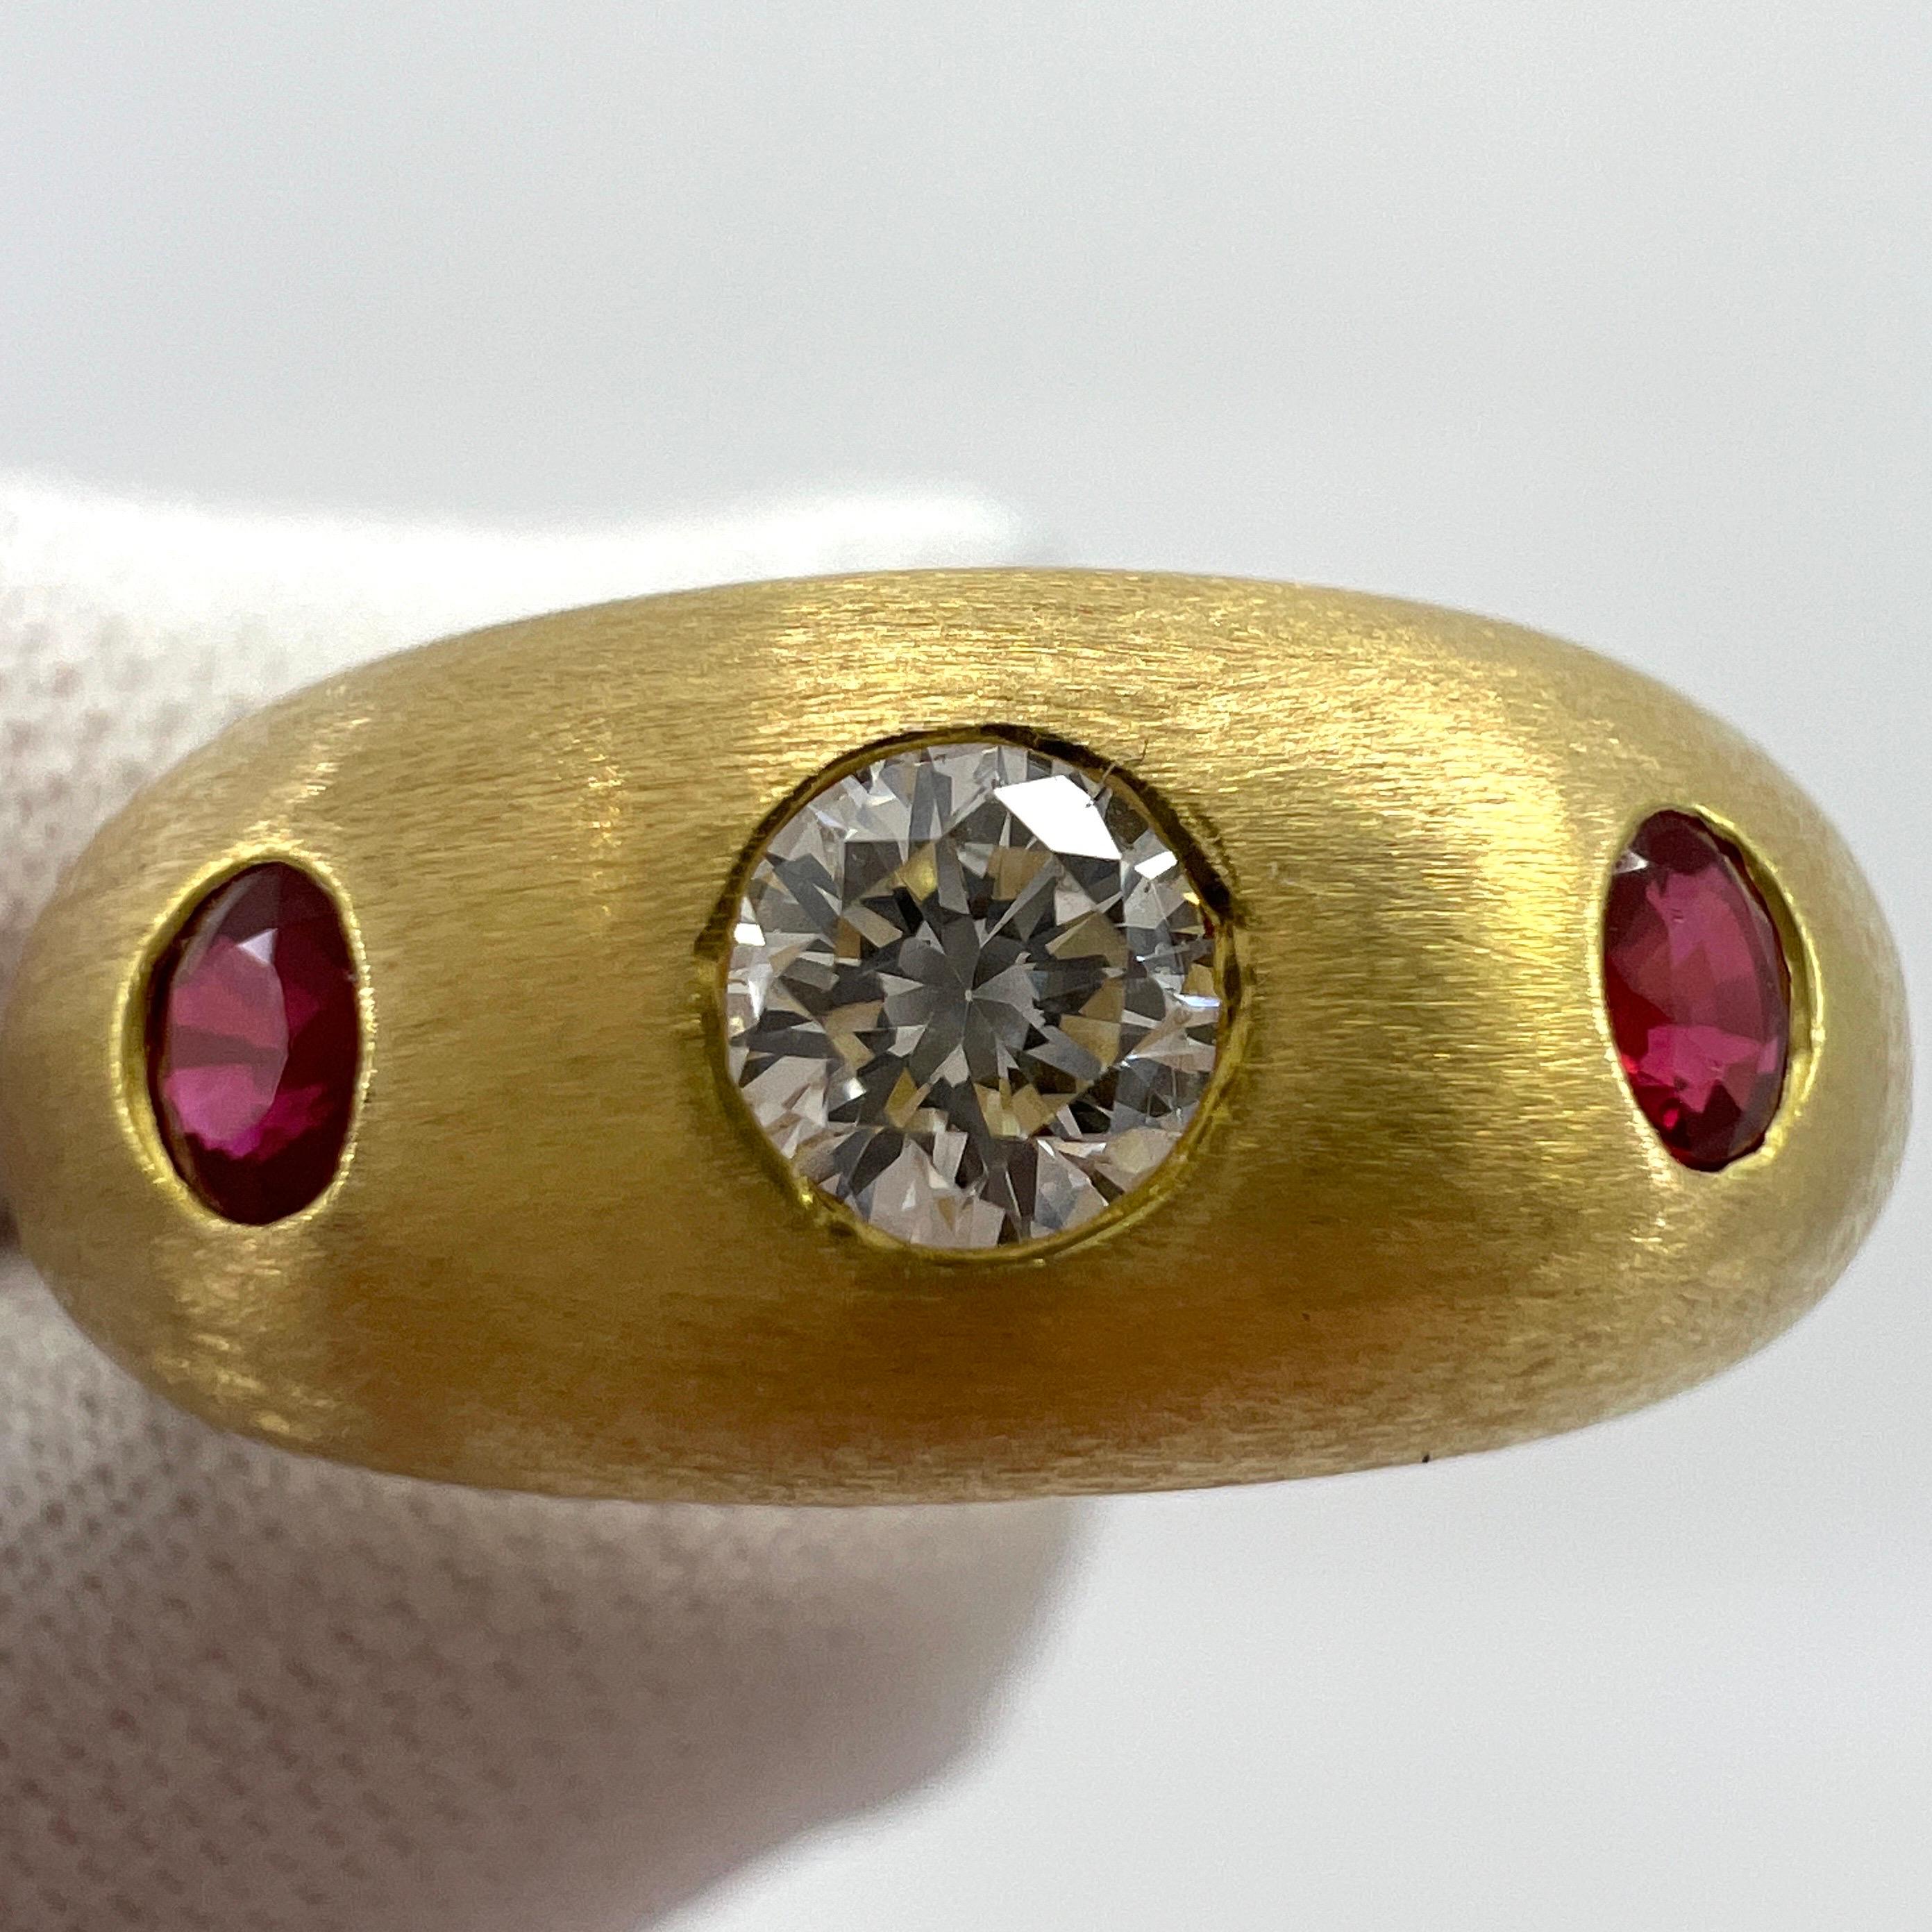 Vintage Cartier Diamond & Ruby 18k Brushed Yellow Gold Three Stone Domed Ring.

Stunning yellow gold Cartier ring set with a beautiful 3.5mm centre diamond with F/G Colour and VVS clarity. This is accented by 2 fine deep red rubies approx 2.5mm